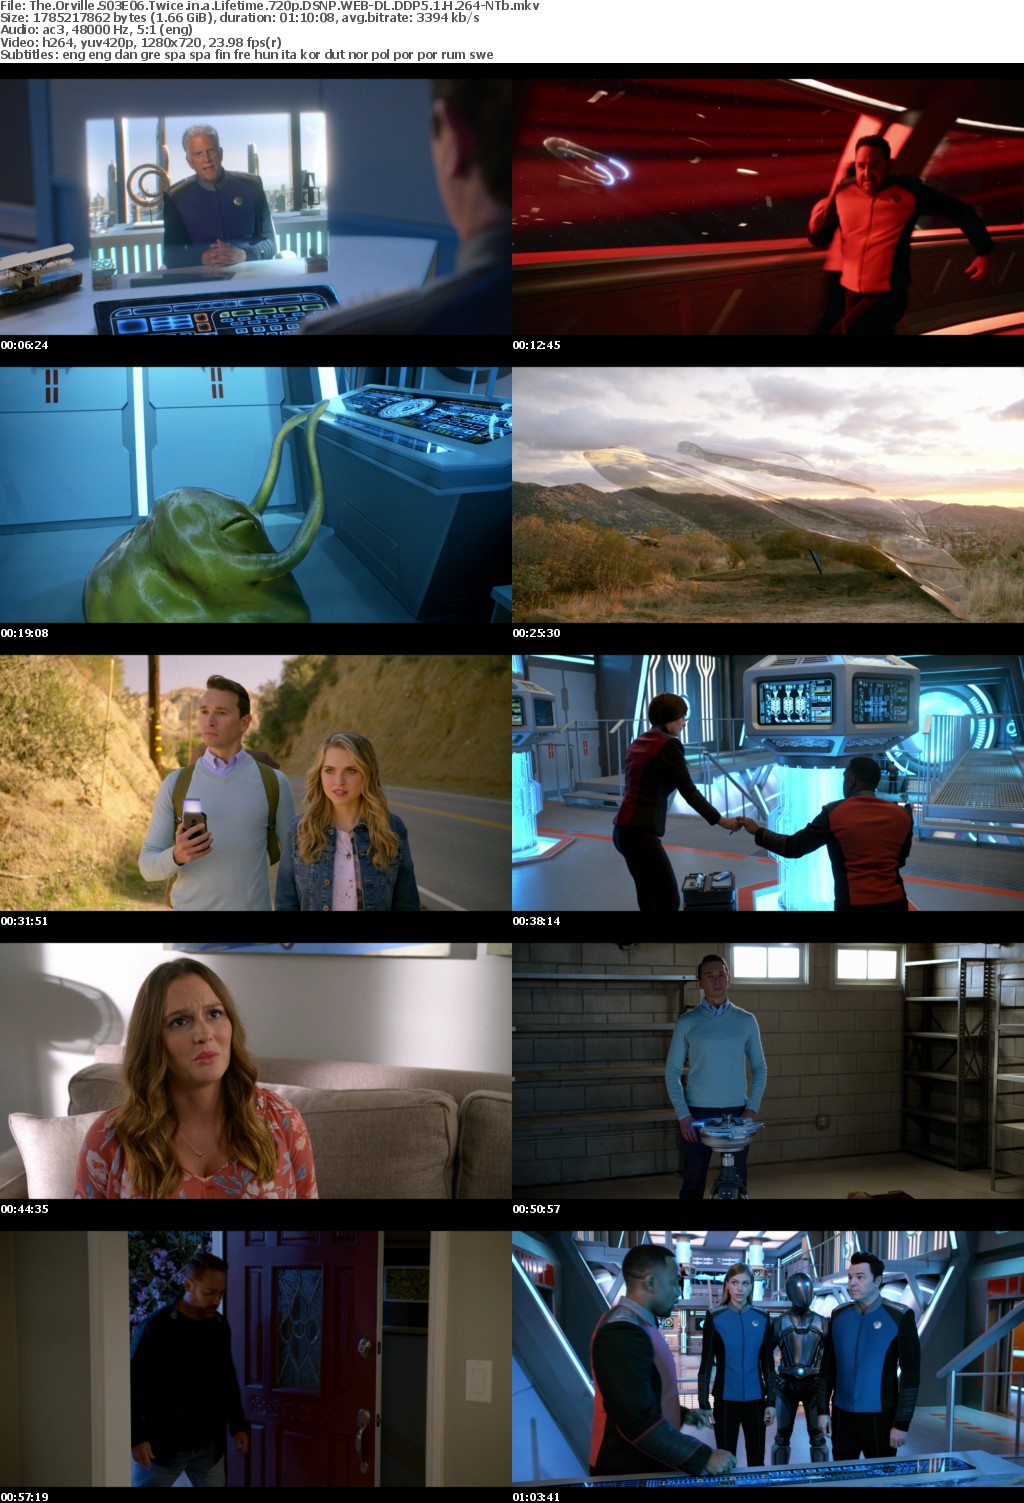 The Orville S03E06 Twice in a Lifetime 720p DSNP WEBRip DDP5 1 x264-NTb